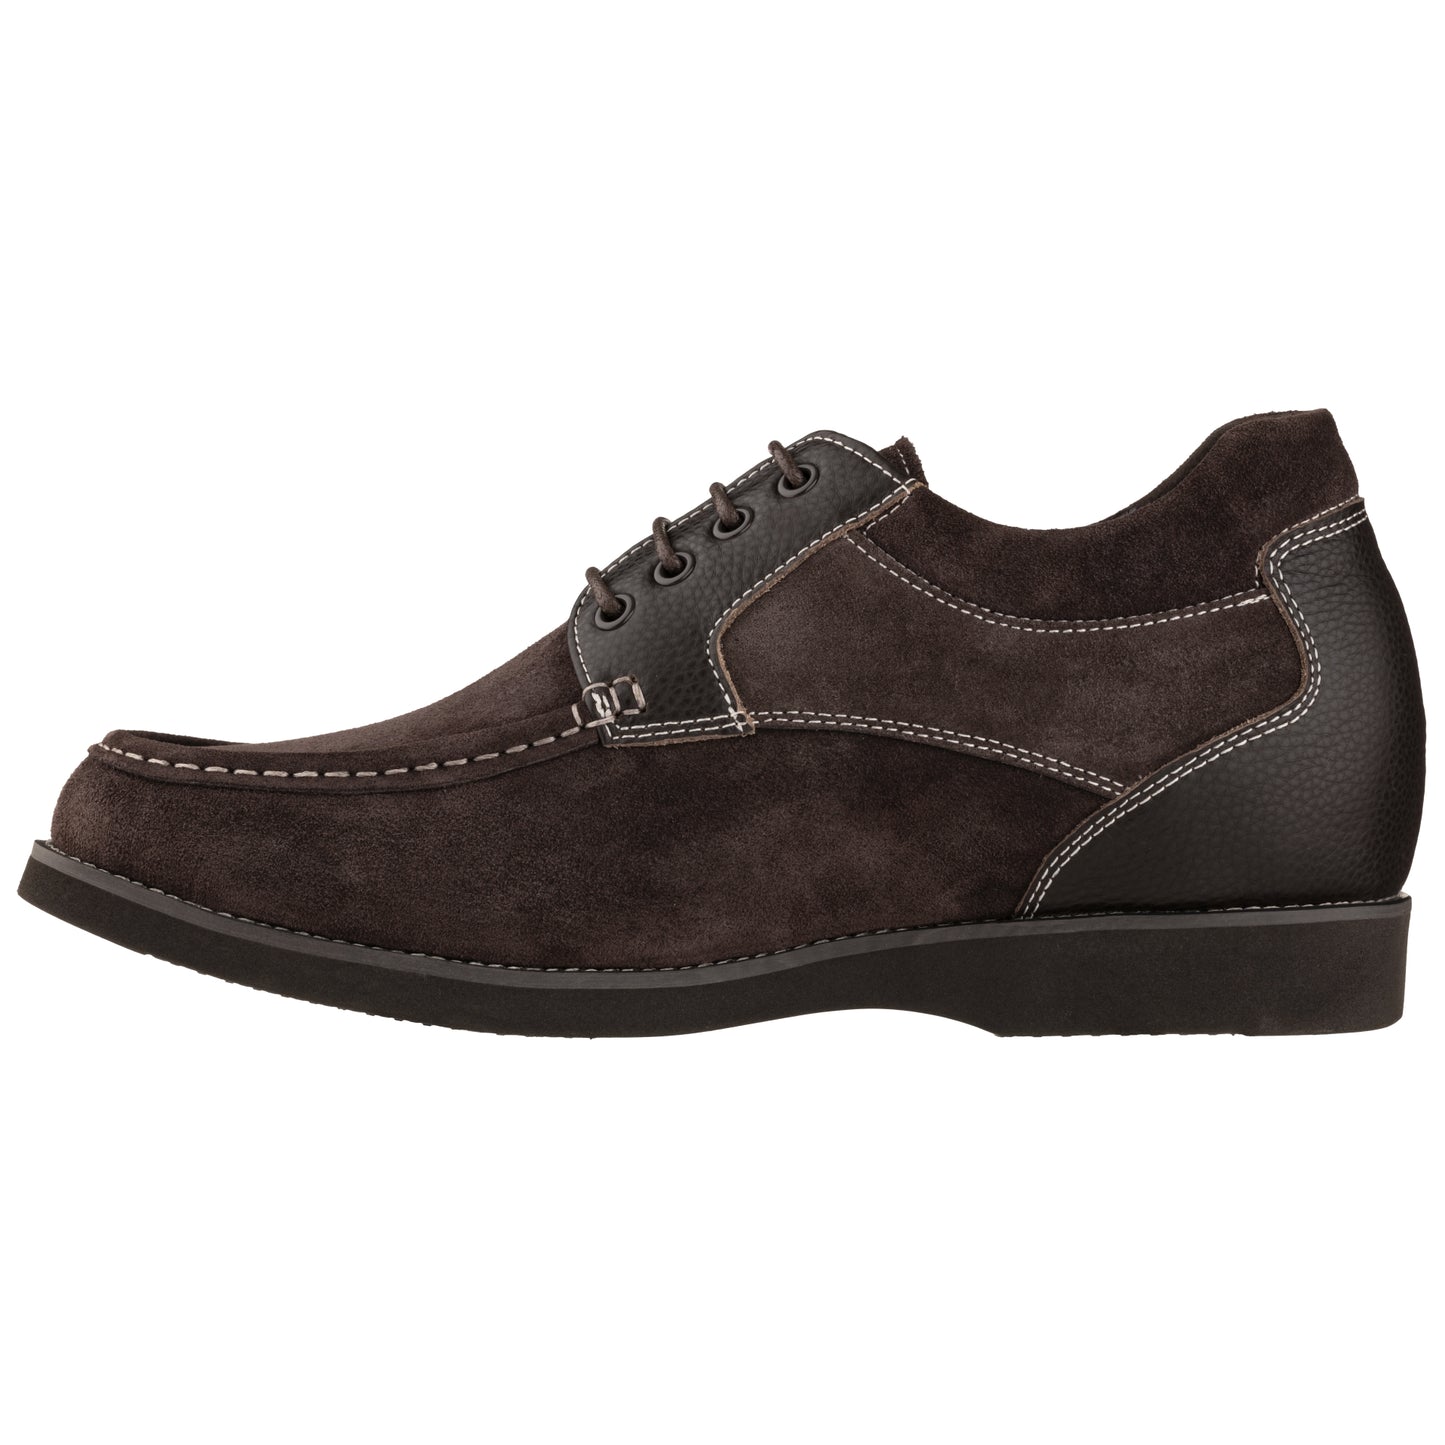 Elevator shoes height increase CALTO - YH9539 - 3.0 Inches (Dark Brown) - Casual Leather Shoes